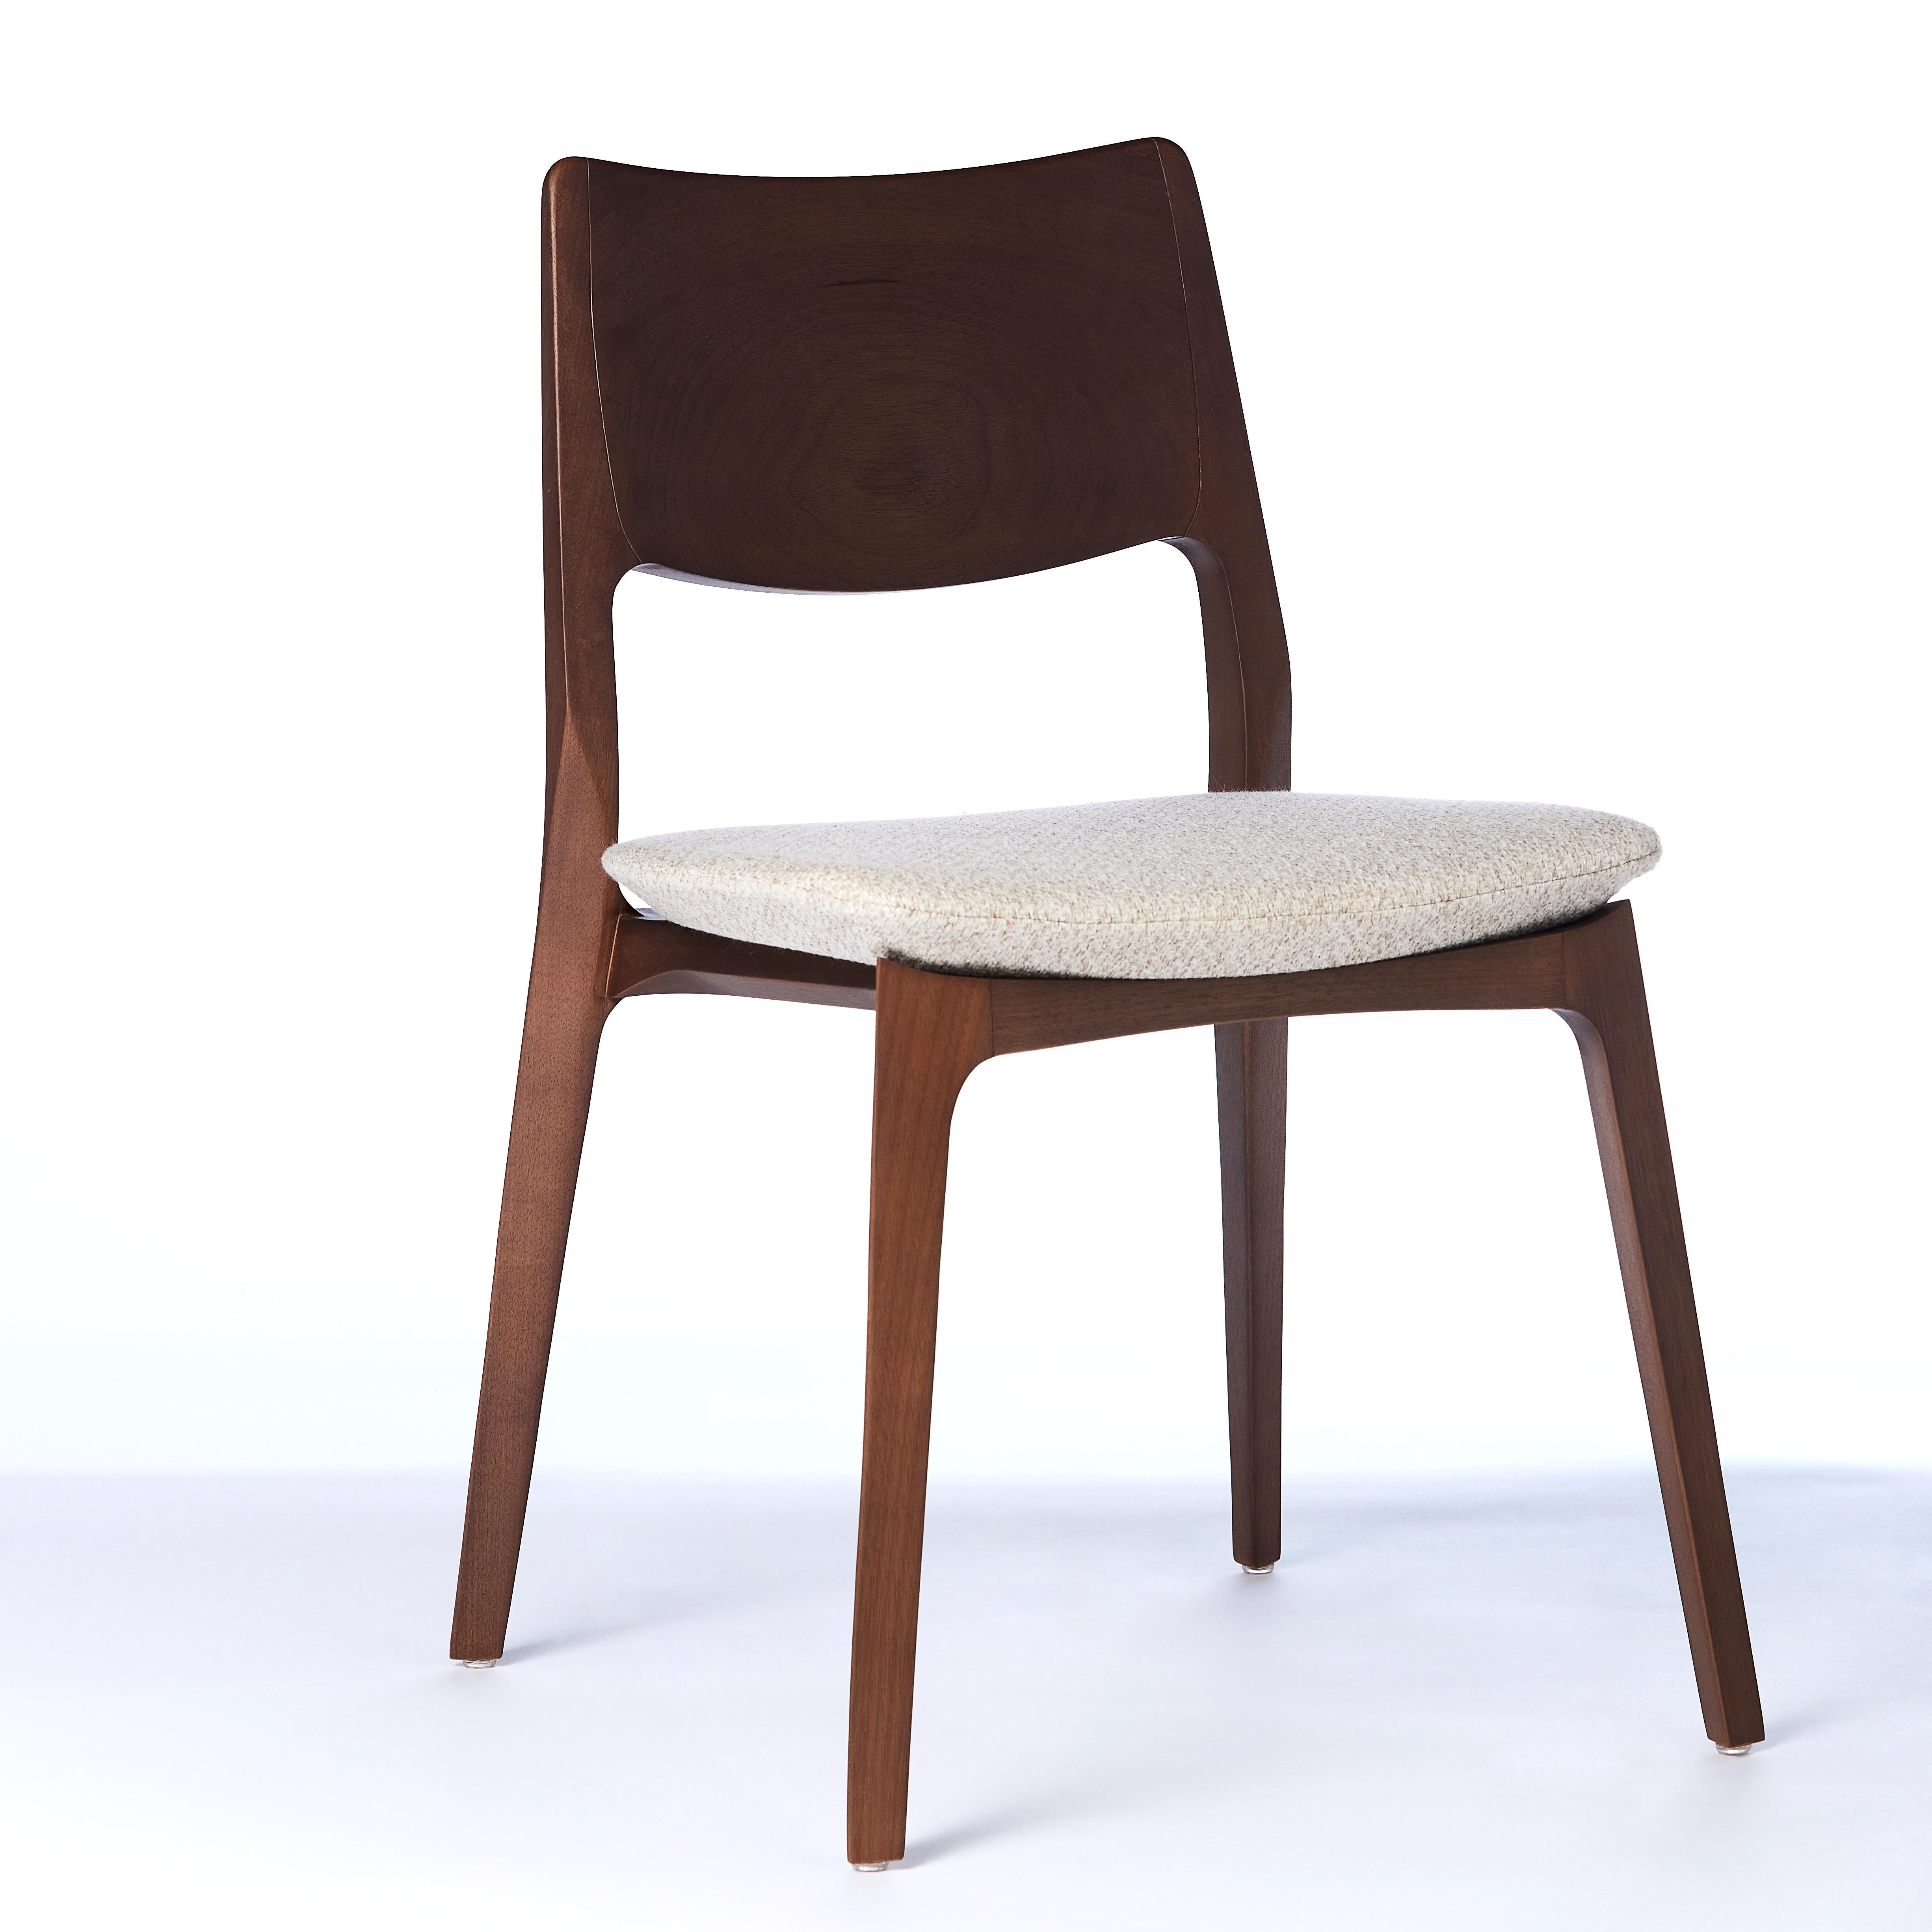 Contemporary Modern Style Aurora Chair Sculpted in Walnut Finish No Arms, leather seating For Sale